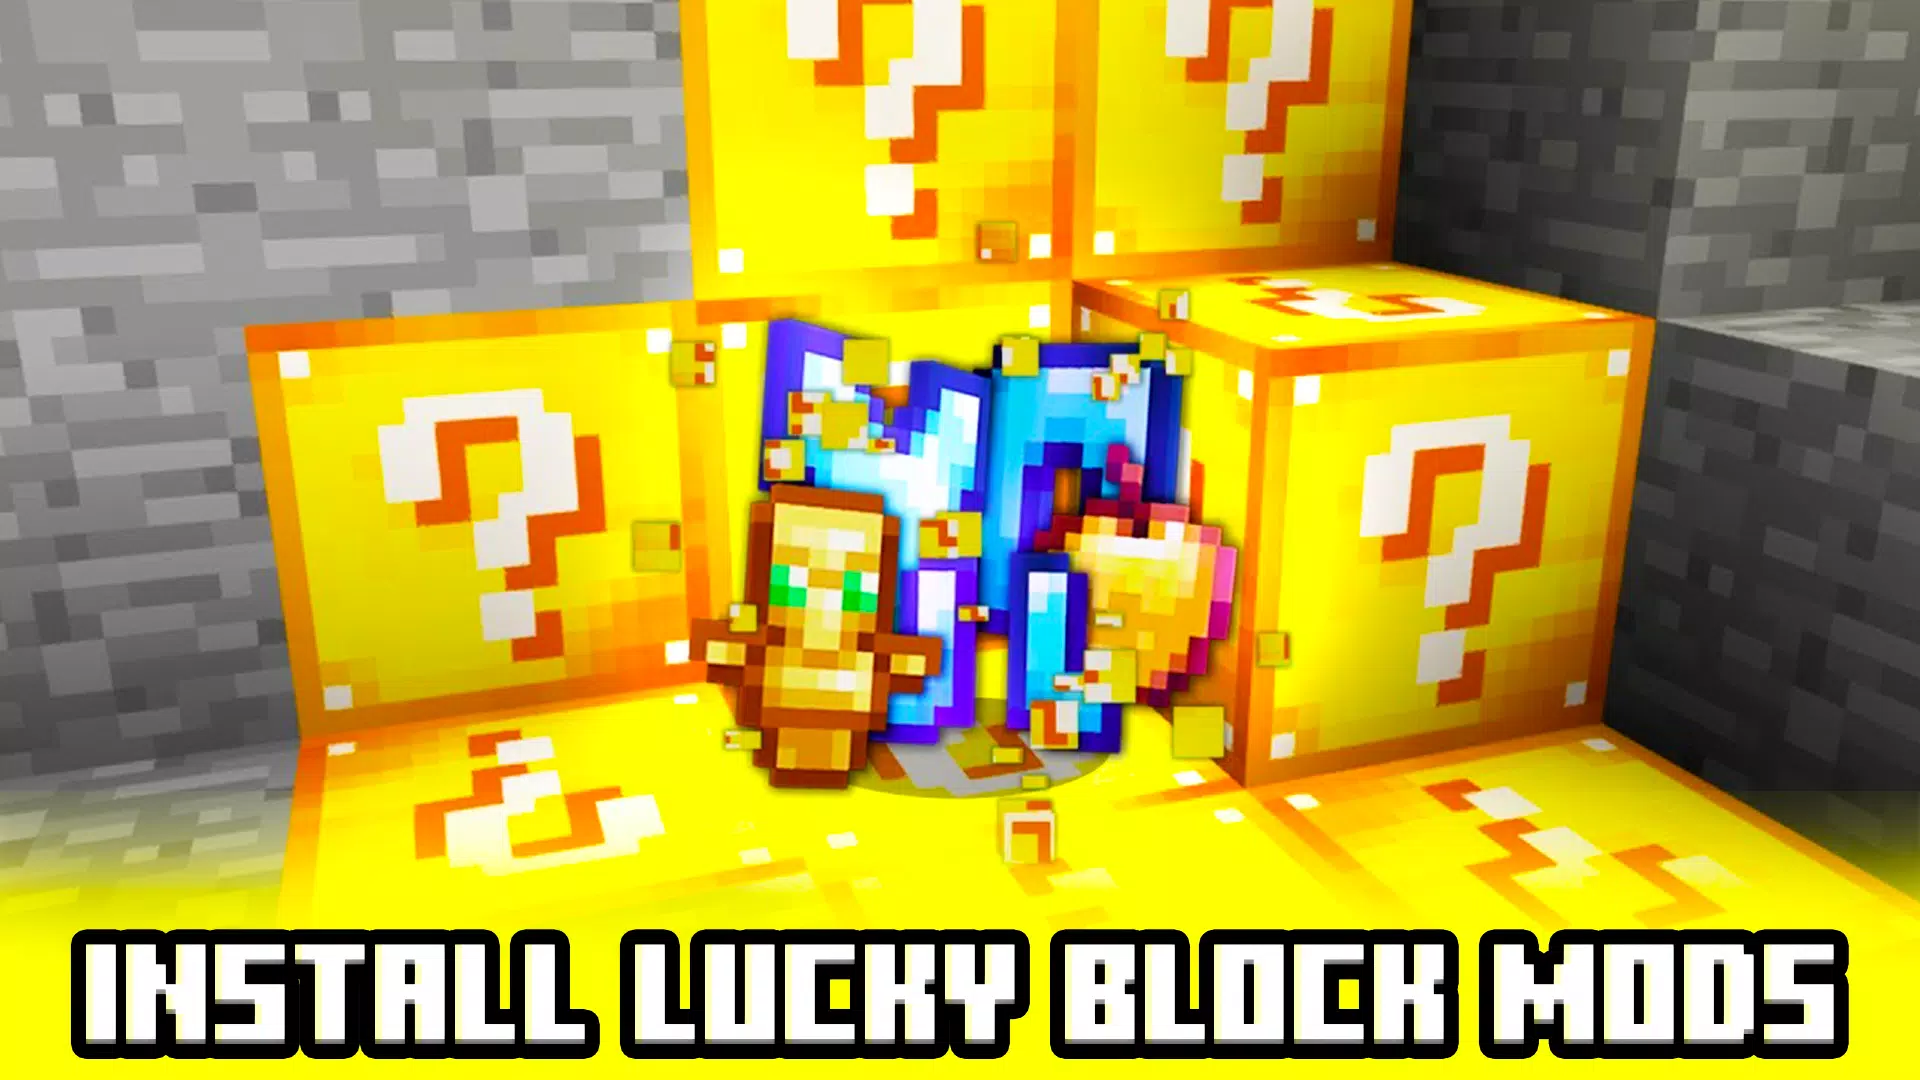 Create a lucky block addon / Addons for Minecraft. Created in Crafty Craft  mod / addon maker. 